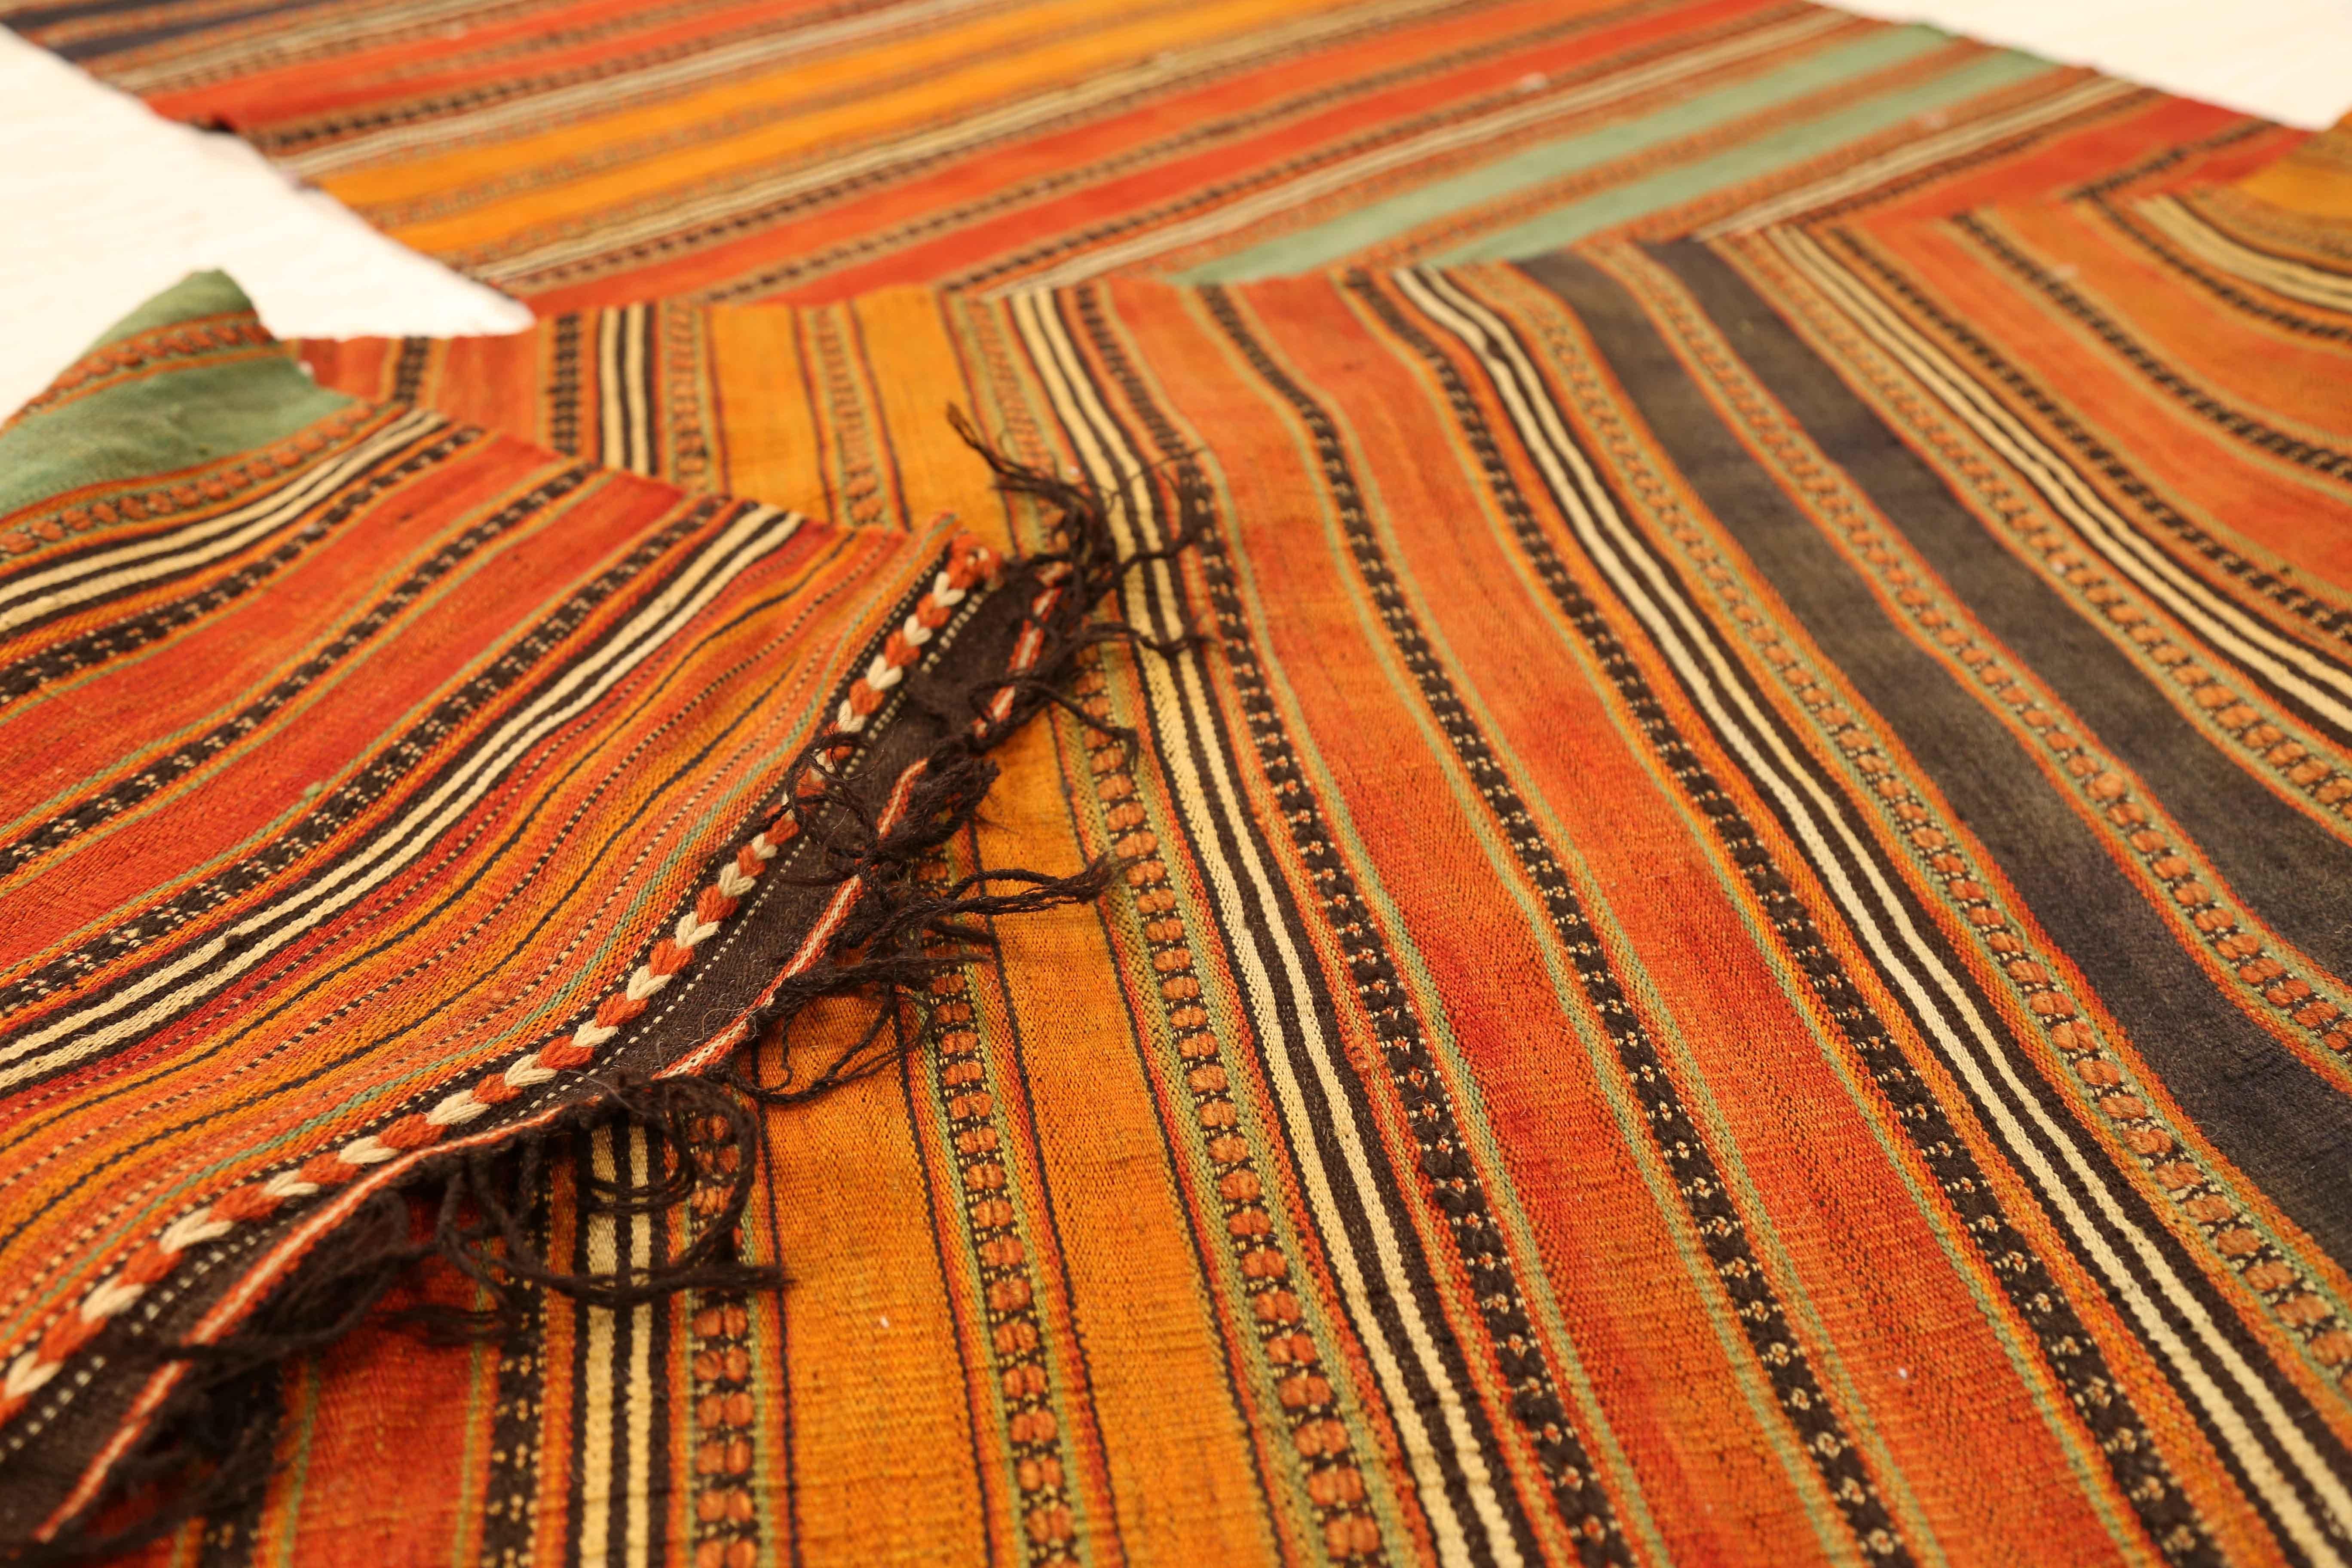 Antique Persian Kilim Runner Rug with Colored Stripes In Excellent Condition For Sale In Dallas, TX